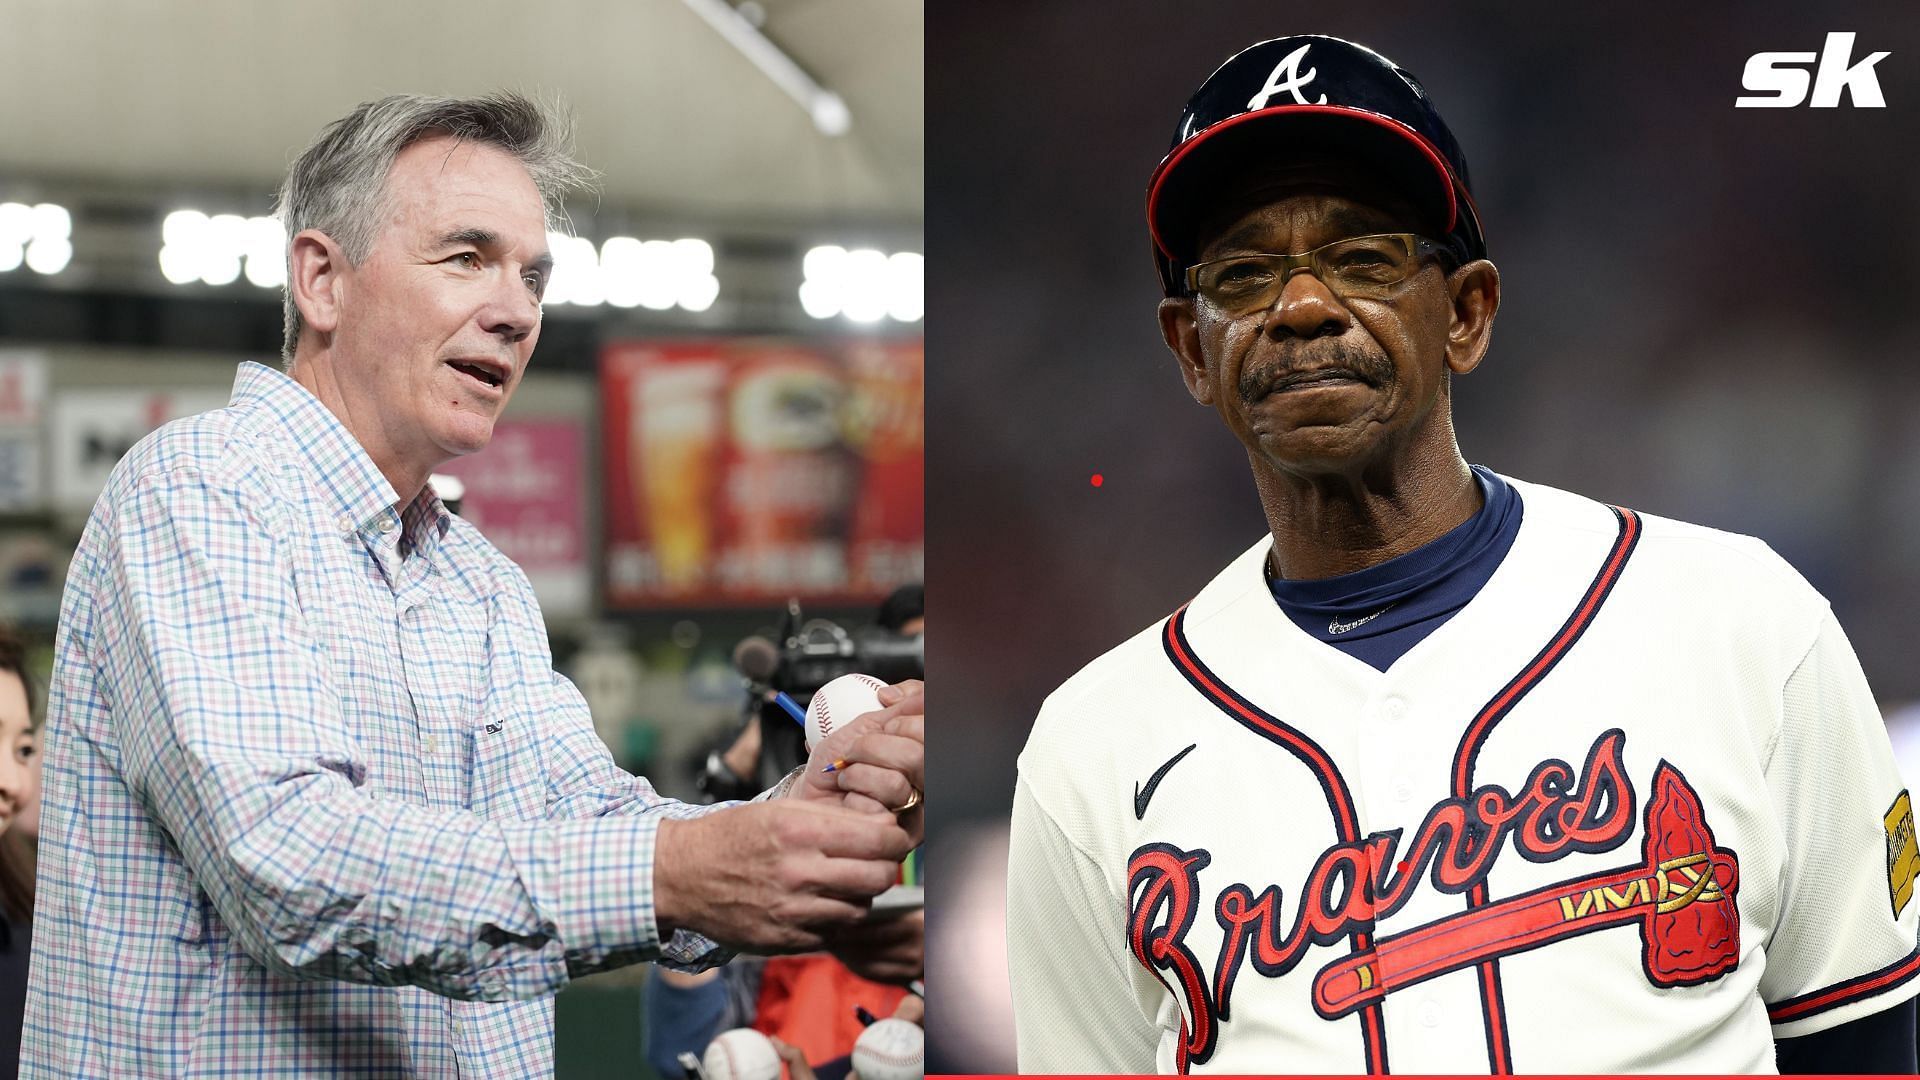 Billy Beane and Ron Washington were depicted in one of Moneyball